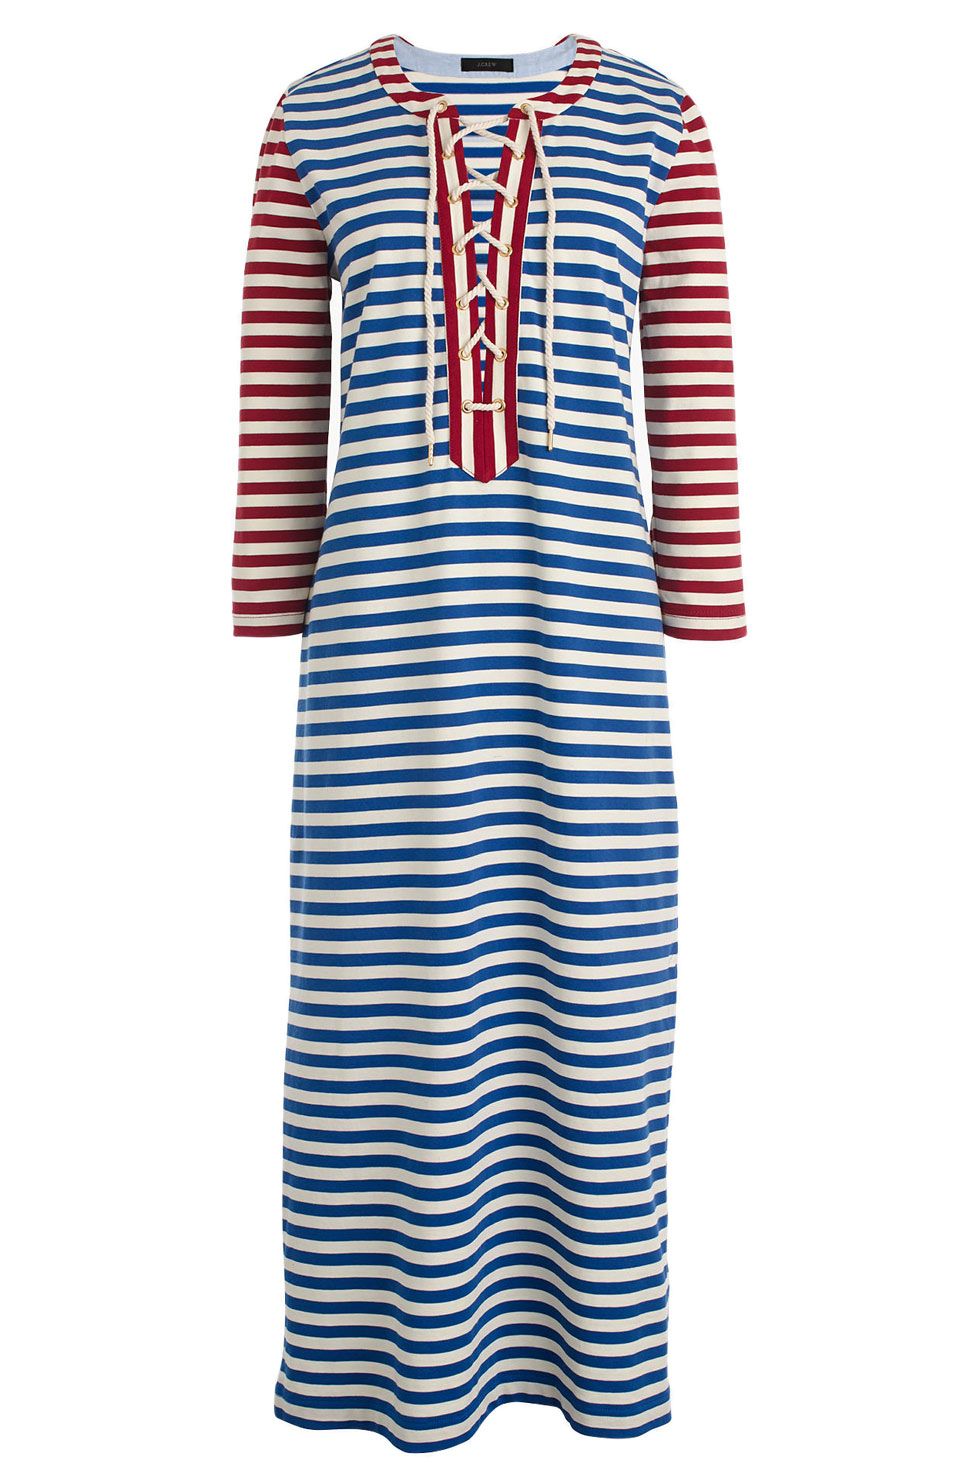 <p>
J. Crew Striped Lace-Up Dress, $98; <a href="https://www.jcrew.com/p/womens_category/dresses/day/striped-laceup-dress/G3607">jcrew.com</a></p><p><span class="redactor-invisible-space" data-verified="redactor" data-redactor-tag="span" data-redactor-class="redactor-invisible-space"></span></p>